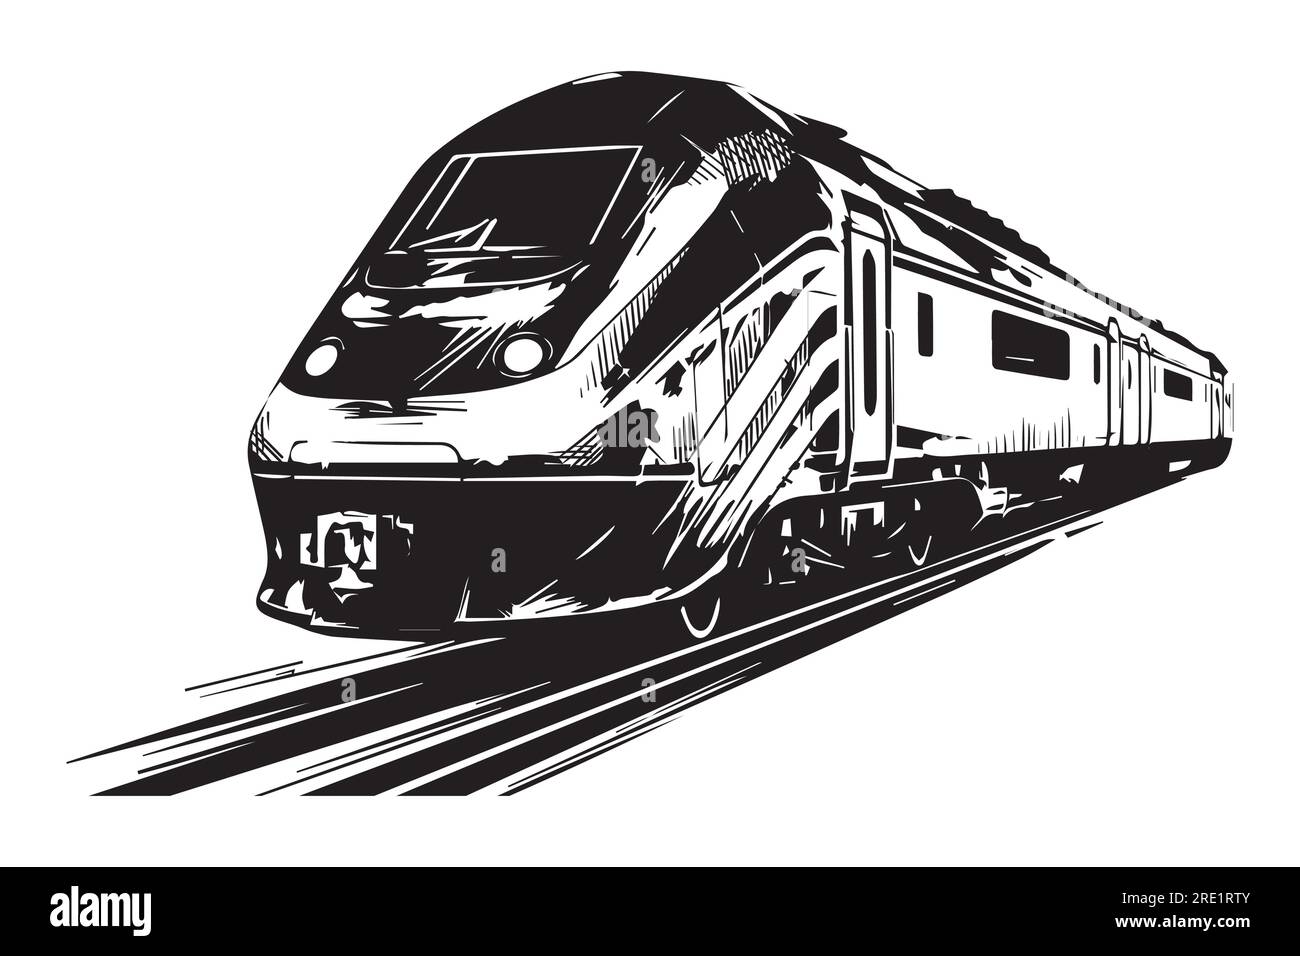 High Speed Train Drawing Speed Stock Illustrations – 542 High Speed Train Drawing  Speed Stock Illustrations, Vectors & Clipart - Dreamstime